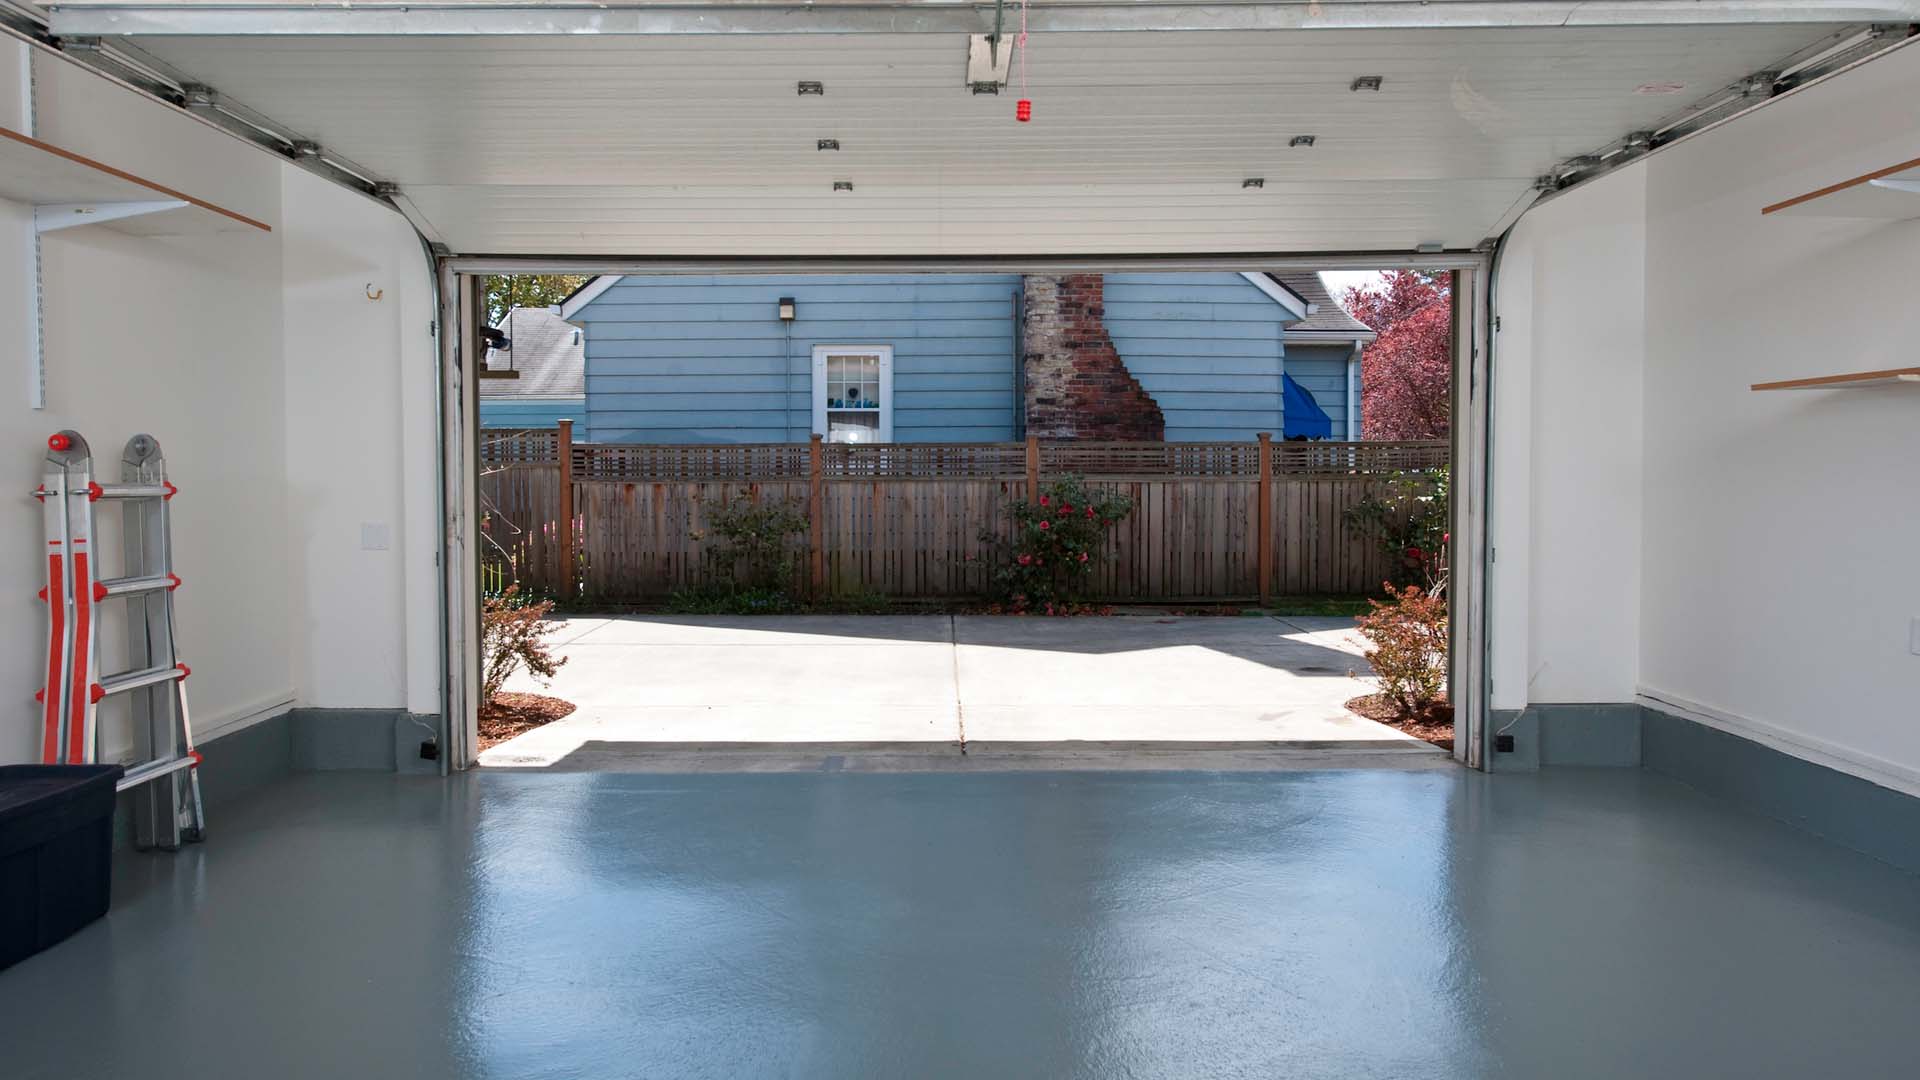 5 Garage Flooring Ideas to Match Your Style - Today's Homeowner